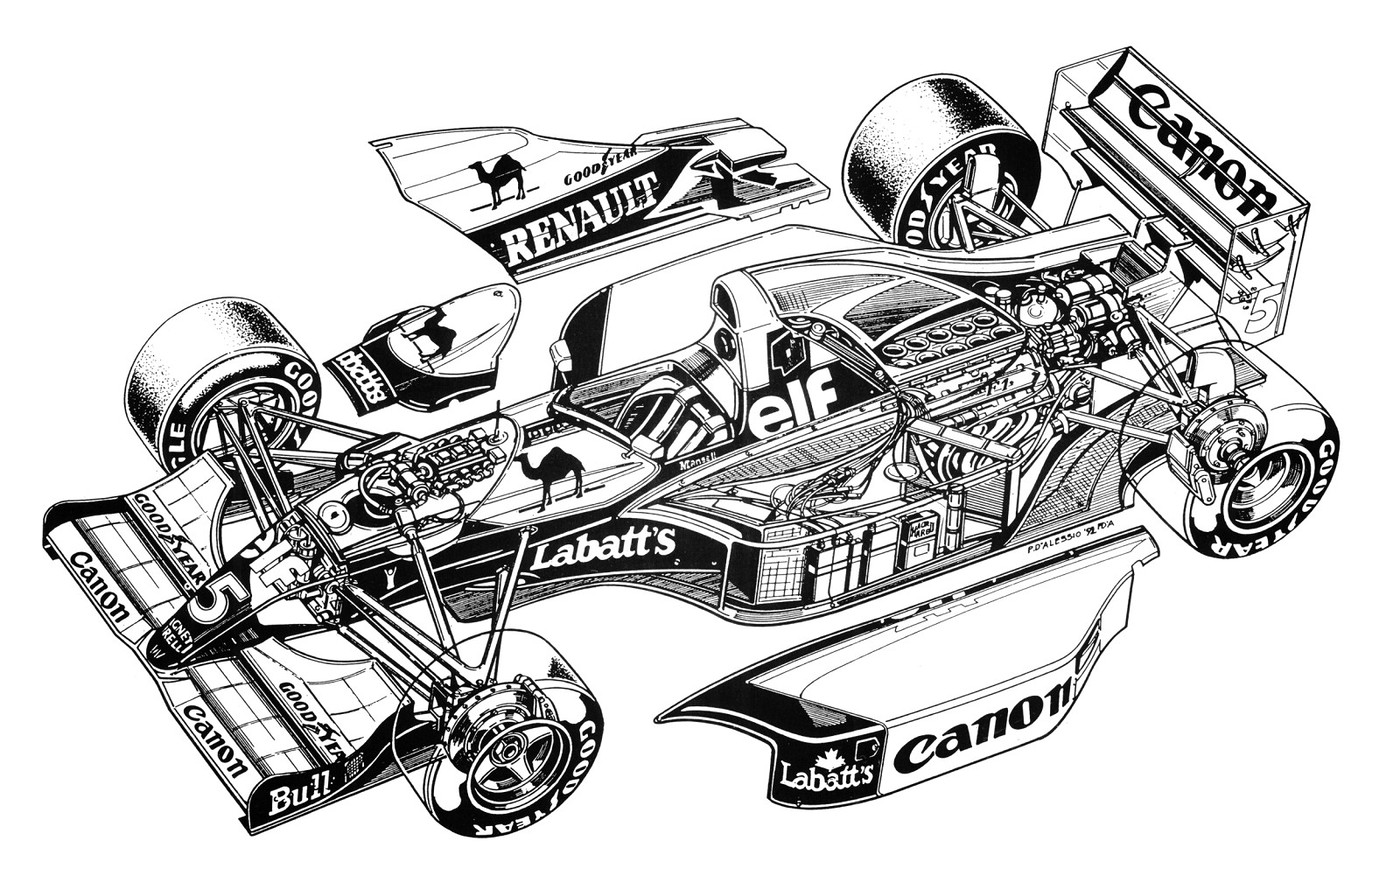 Photo: Williams FW14B-Renault of 1992 Paolo D'Alessio illustration ...